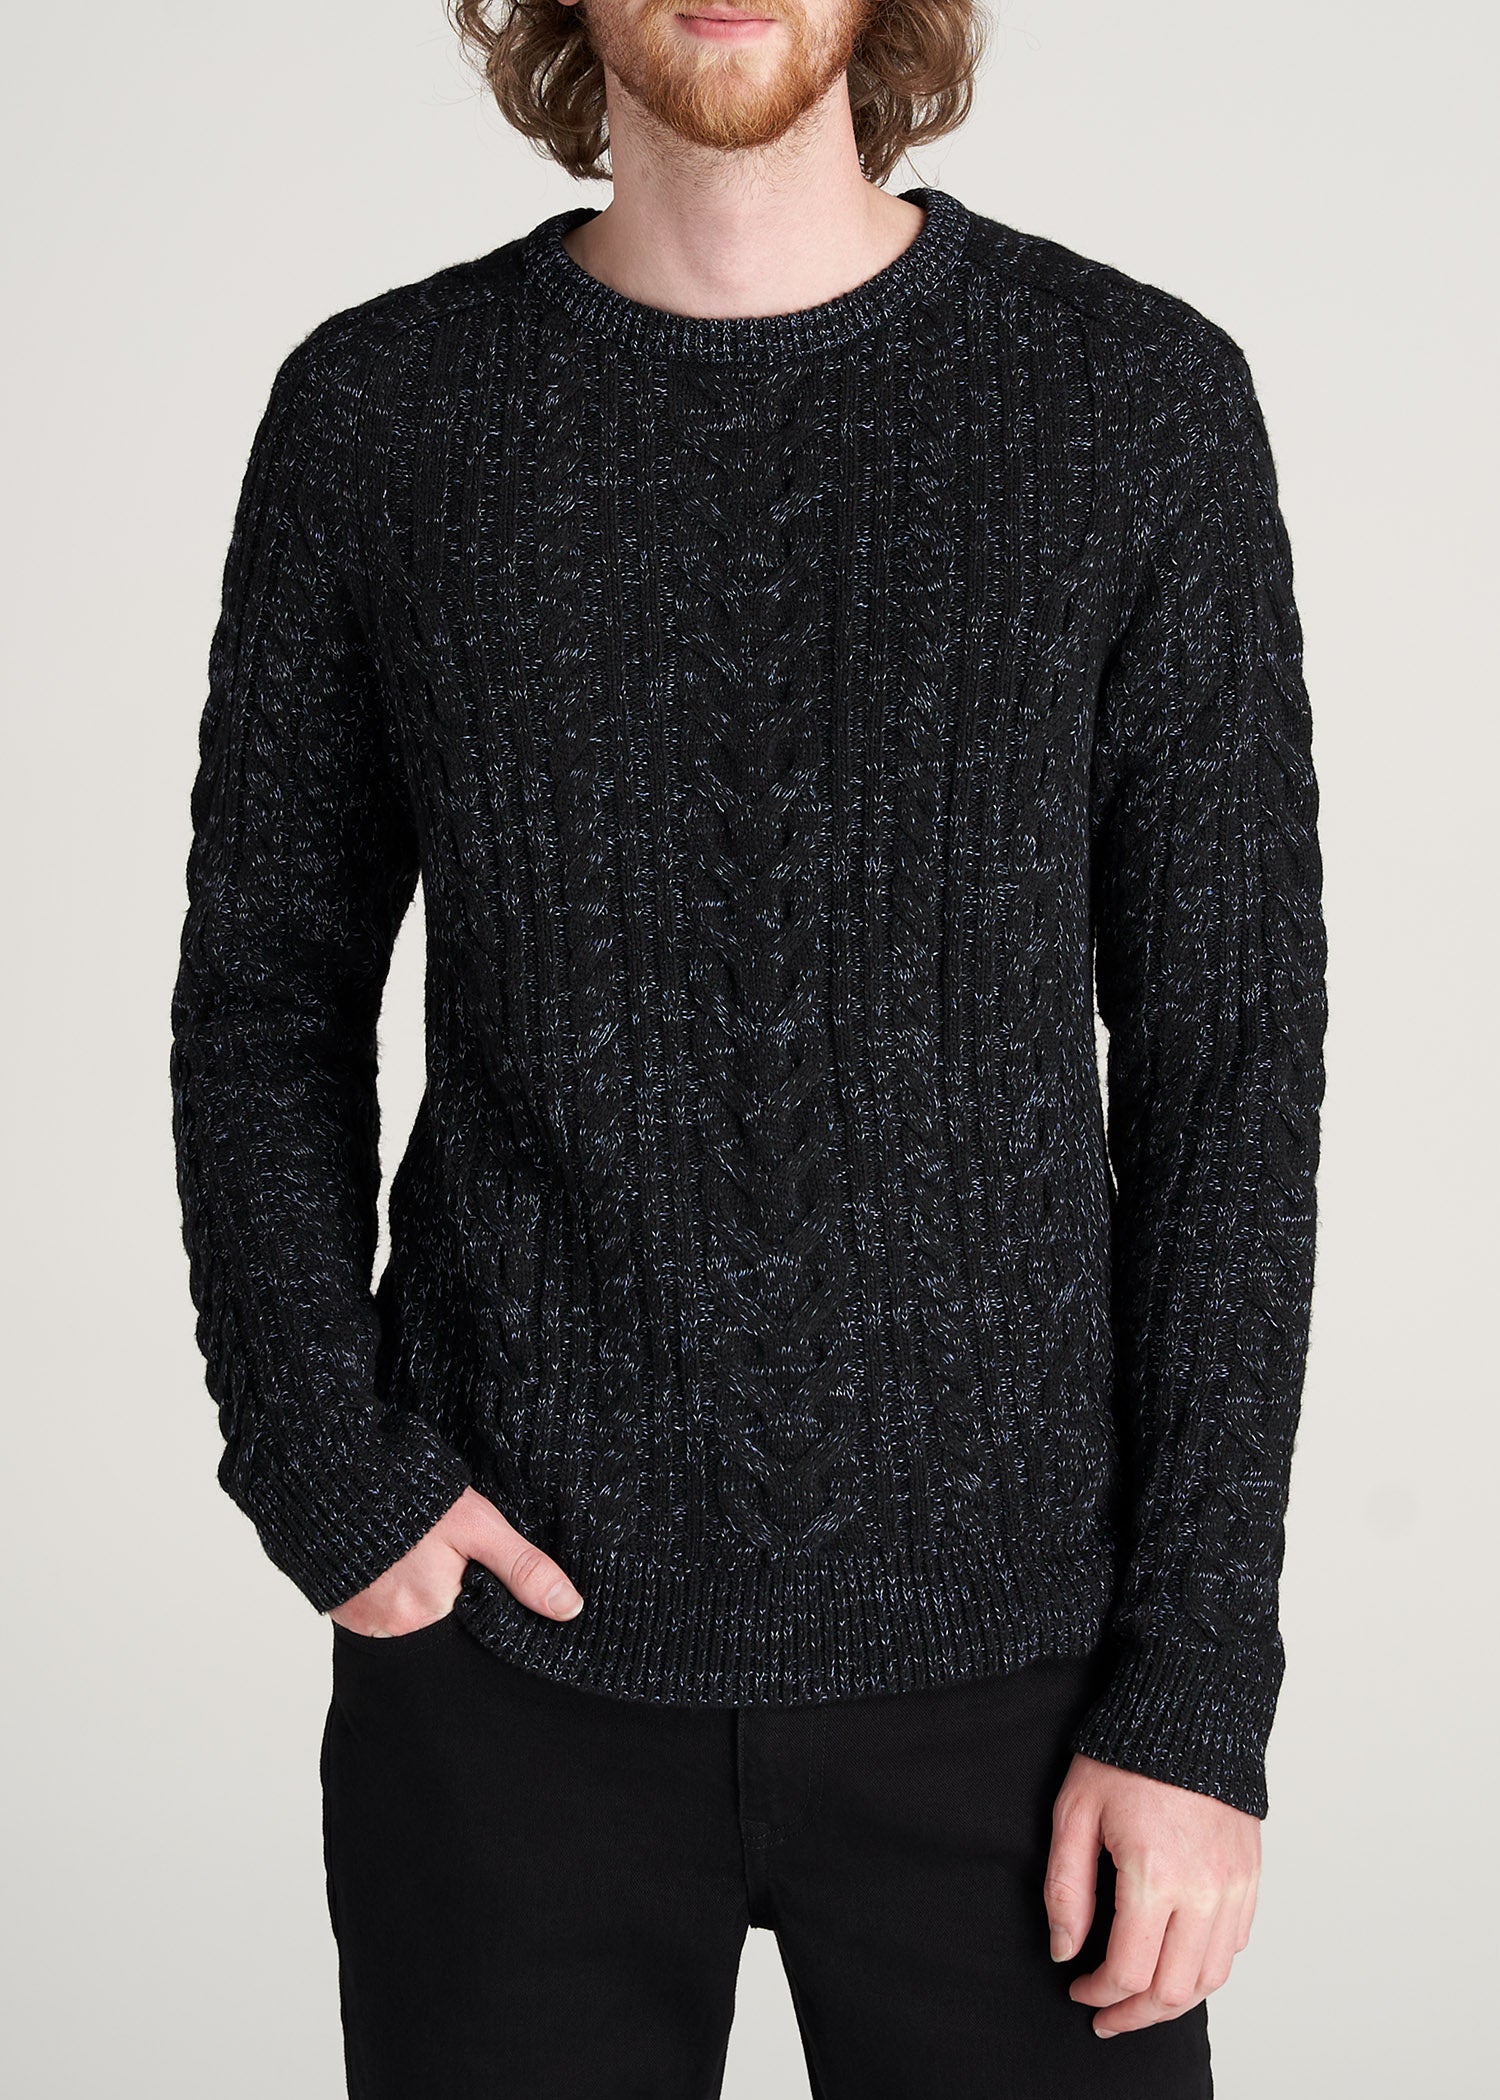 opstelling willekeurig Baars Heavy Cable Knit Tall Men's Sweater | American Tall